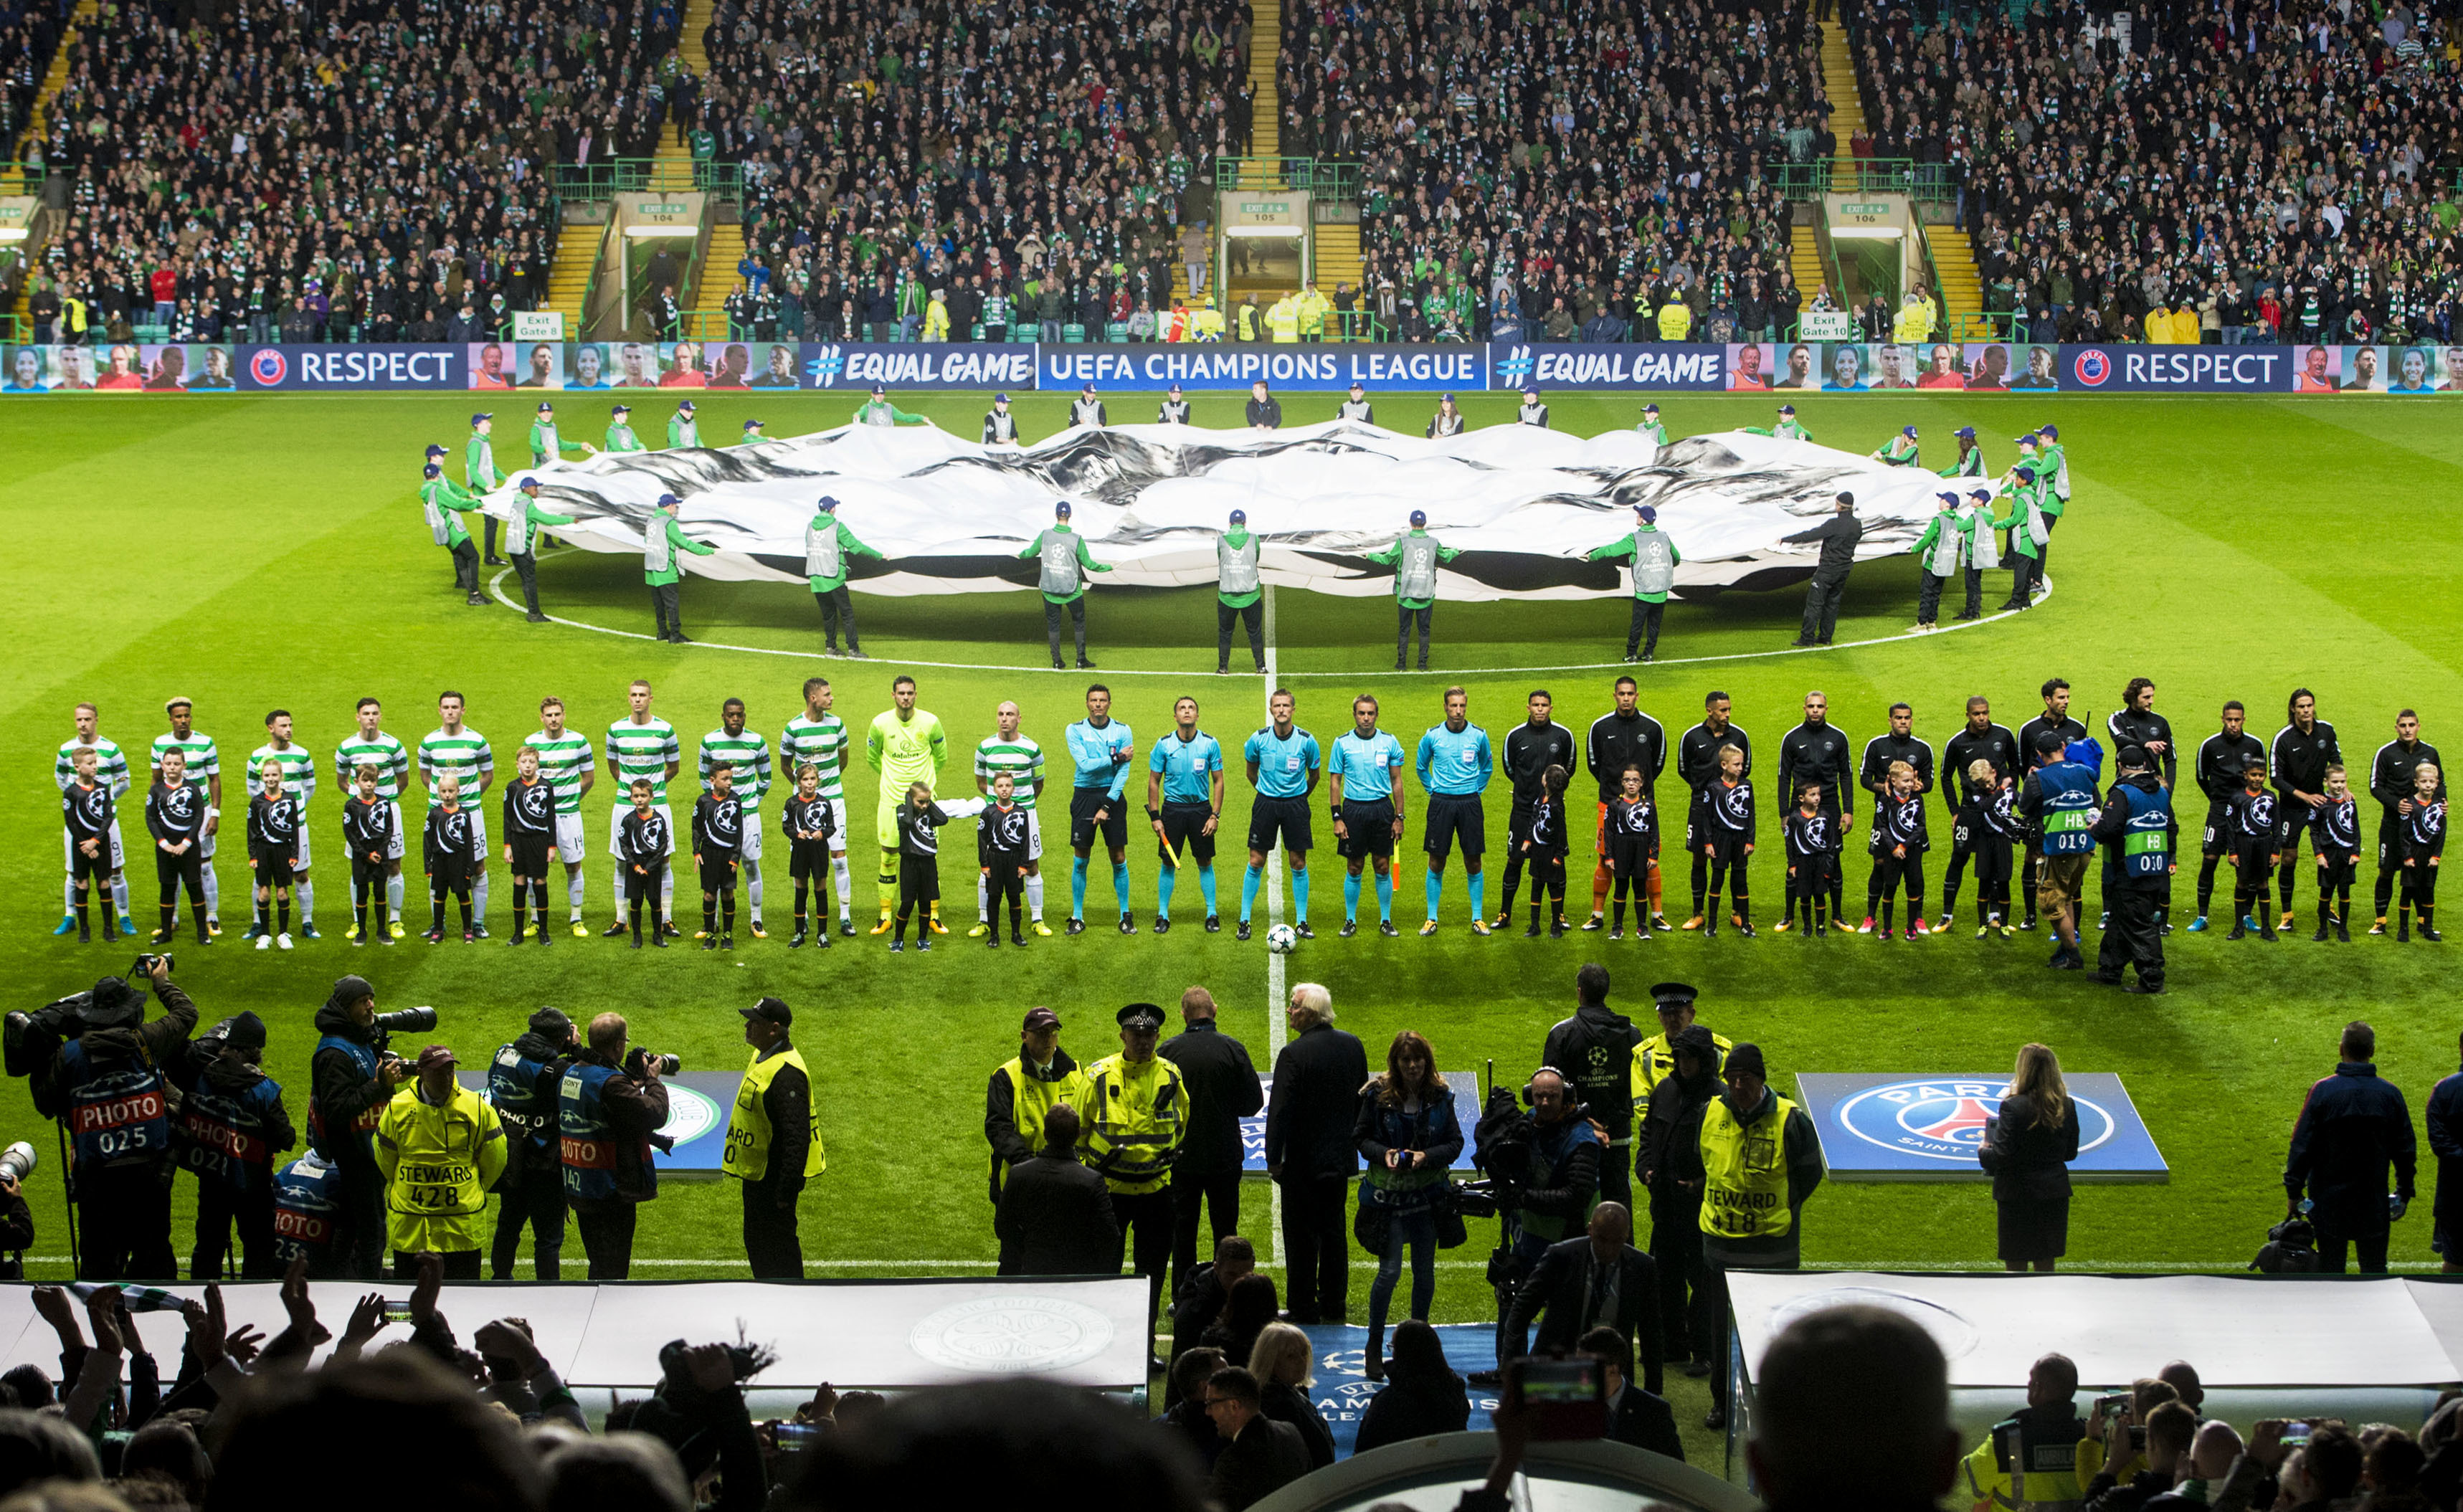 The Celtic and PSG teams line up ahead of kick-off.